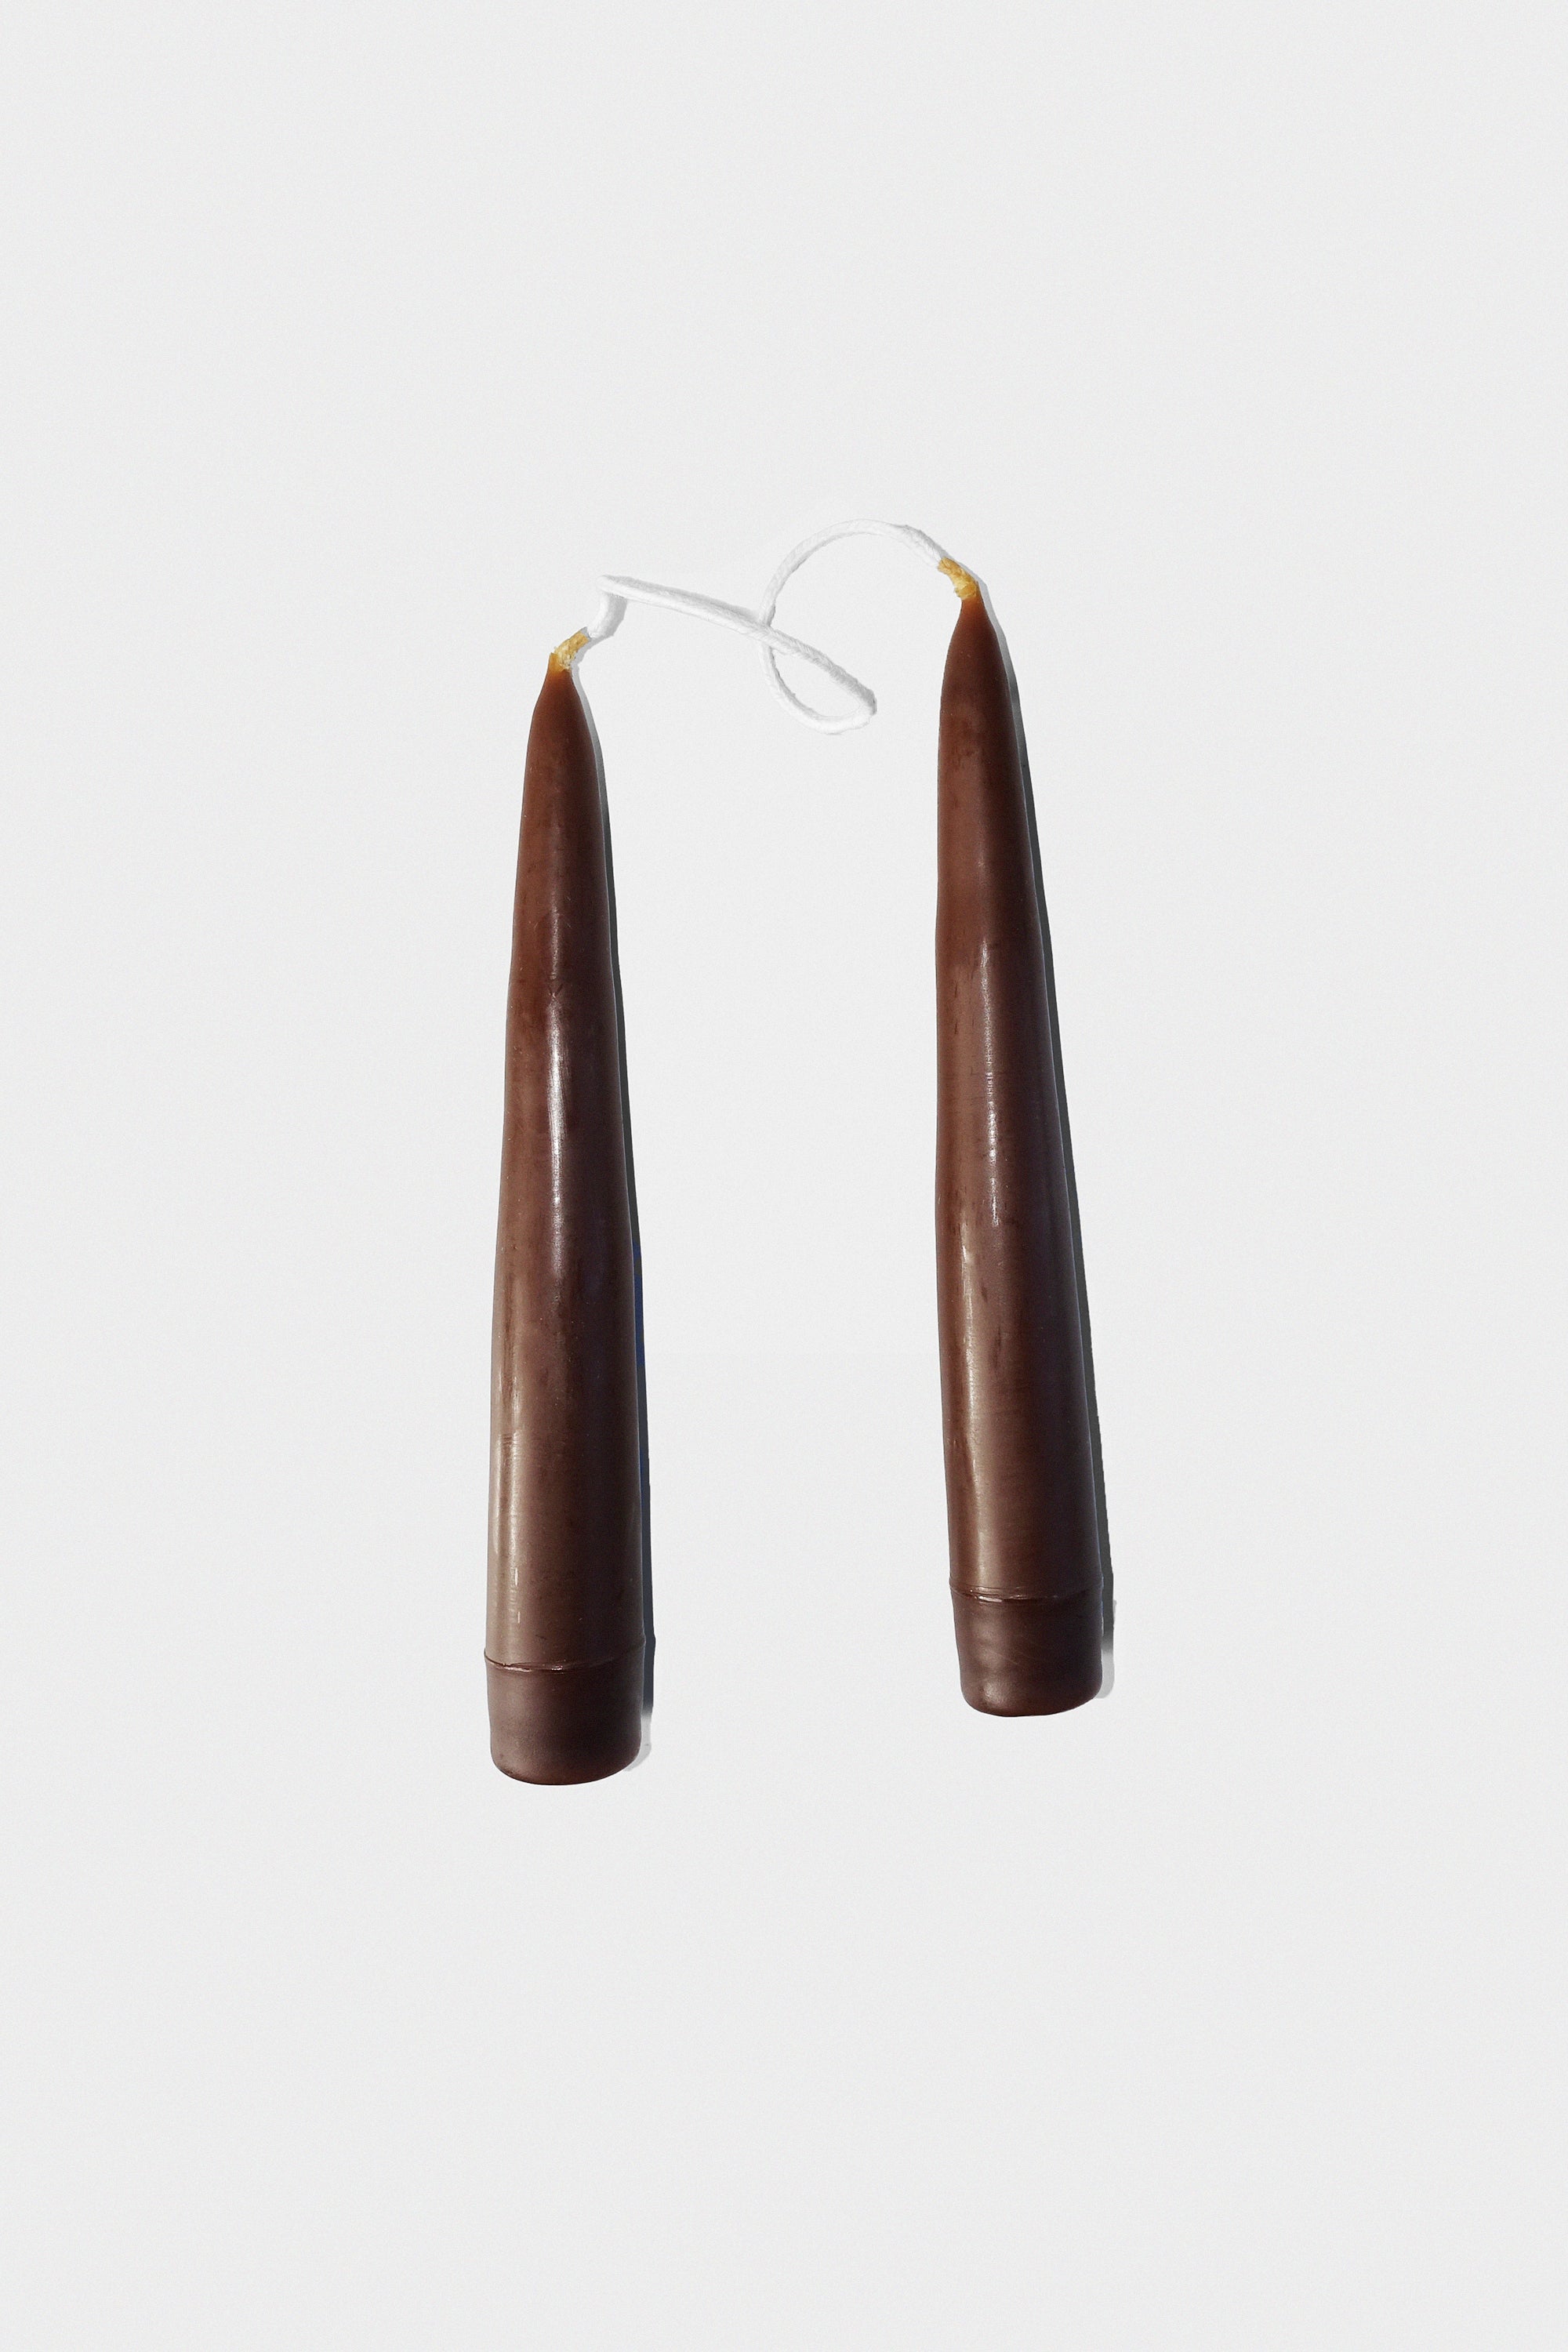 06" Taper Candles in Cocoa